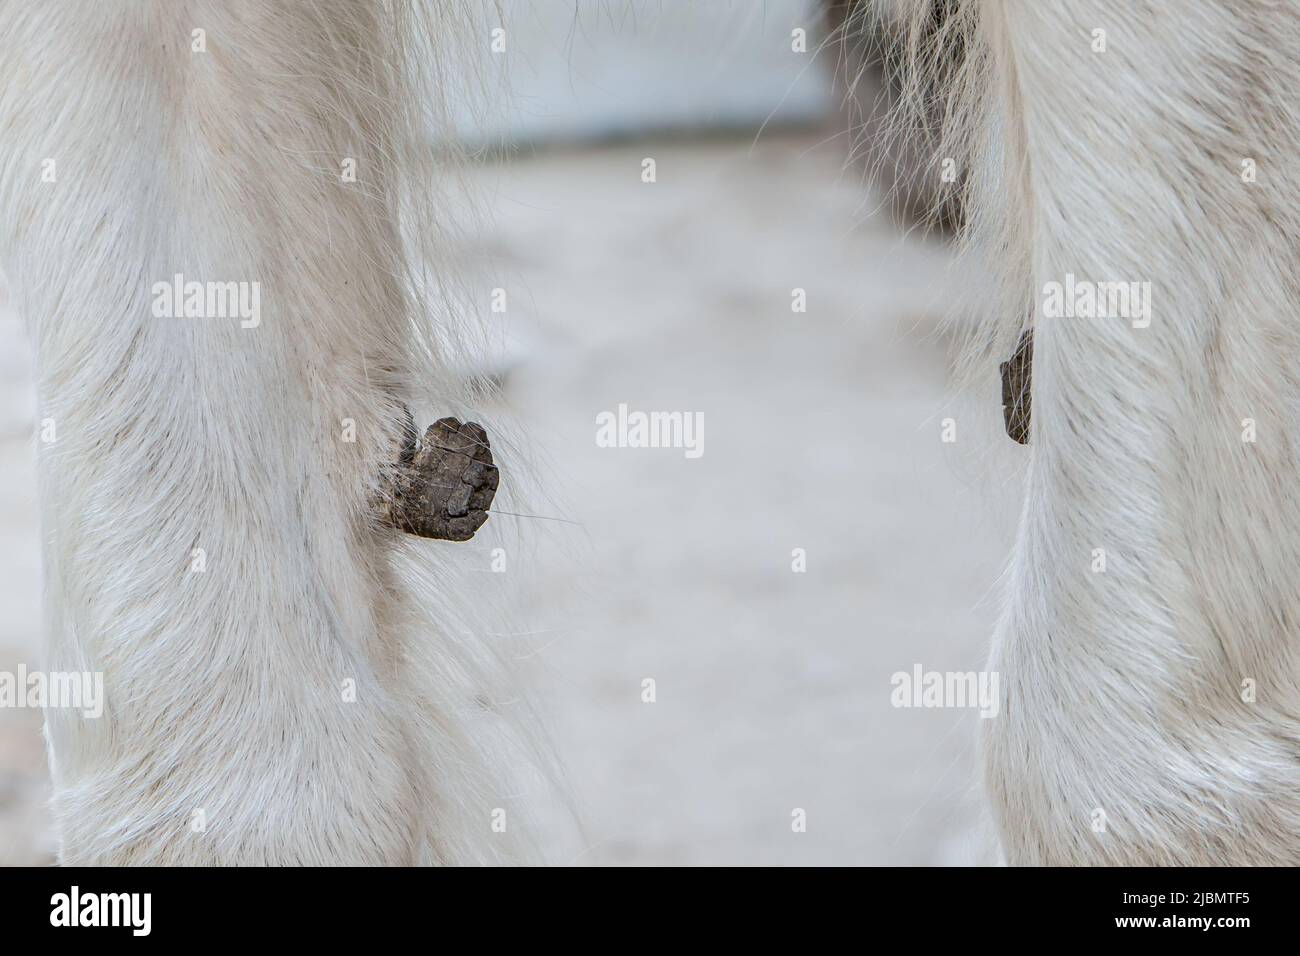 Large chestnut callosity toe on the legs of a gypsy cob draft horse Stock Photo